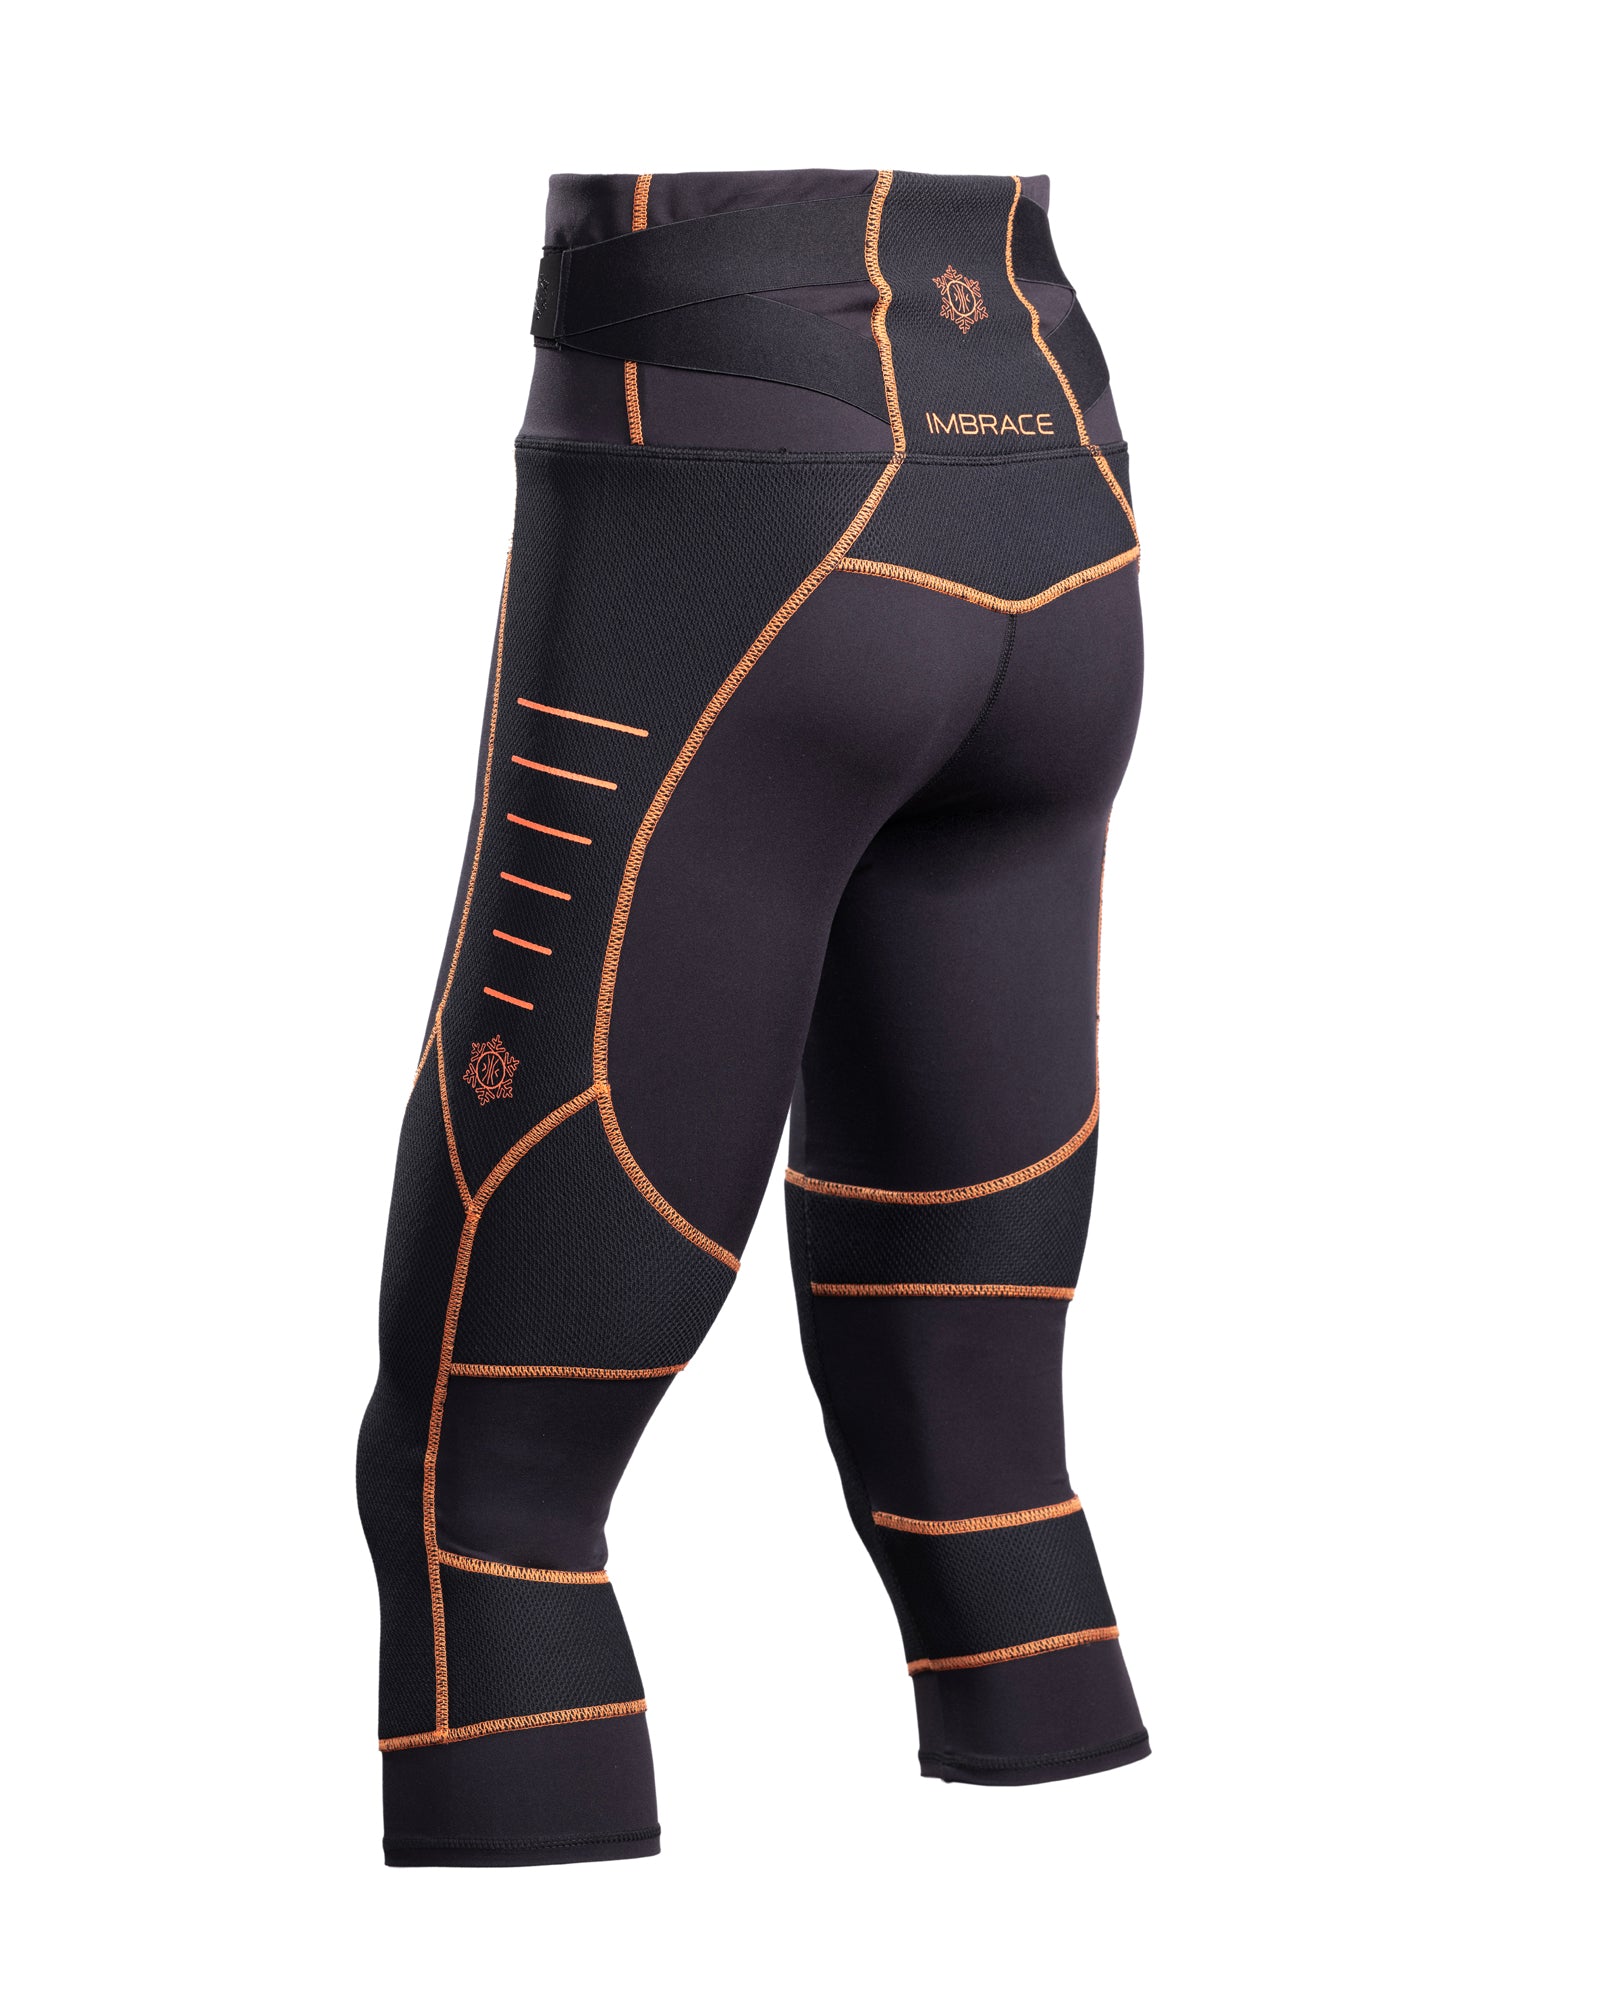 Youth basketball compression pants with knee pads  Compression pants,  Basketball compression pants, Clothes design